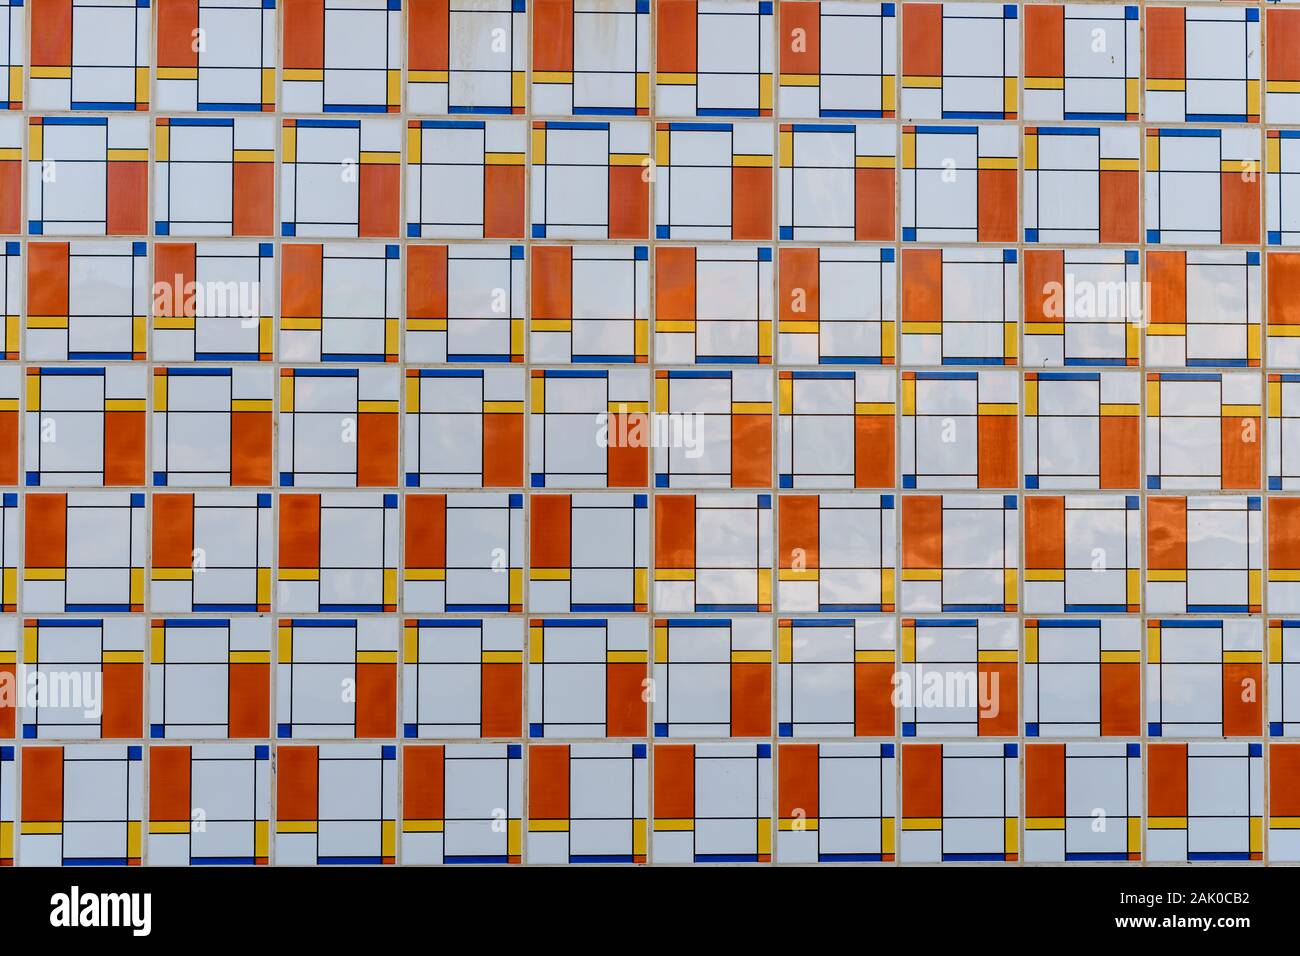 Abstract Ceramic tile pattern close up Stock Photo